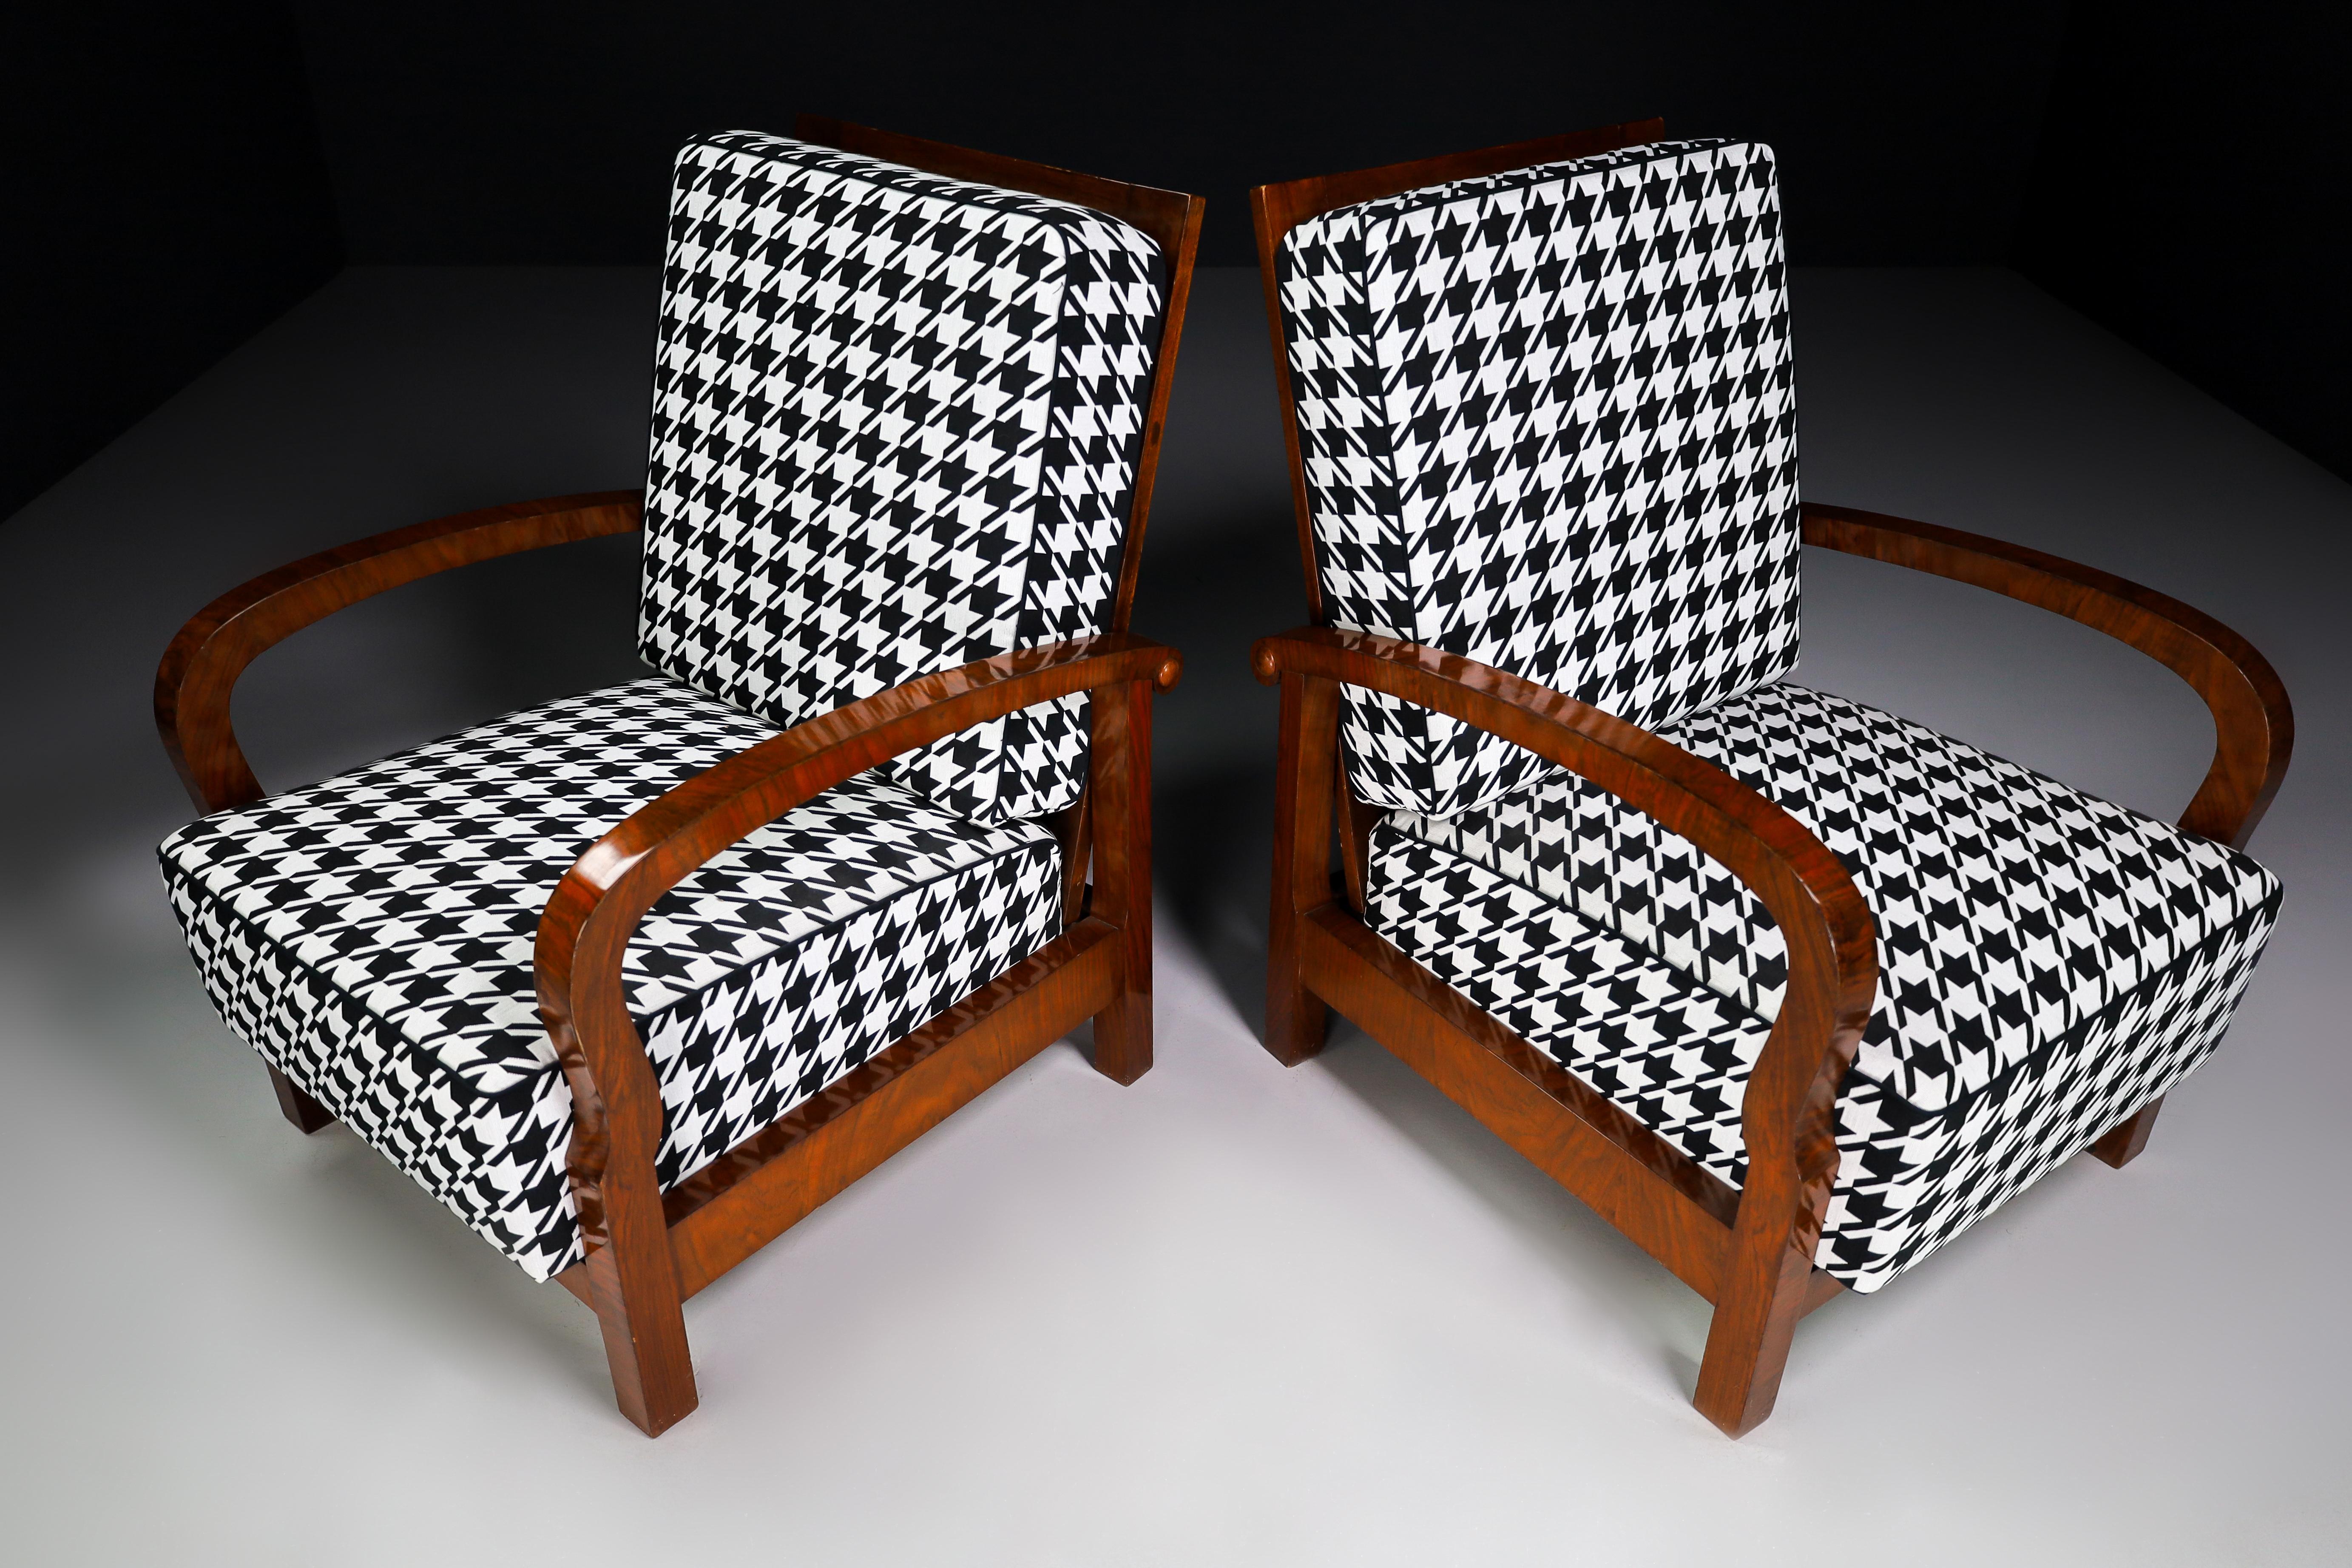 20th Century Art Deco Armchairs in Walnut and Reupholstered Fabric, Praque 1930s For Sale